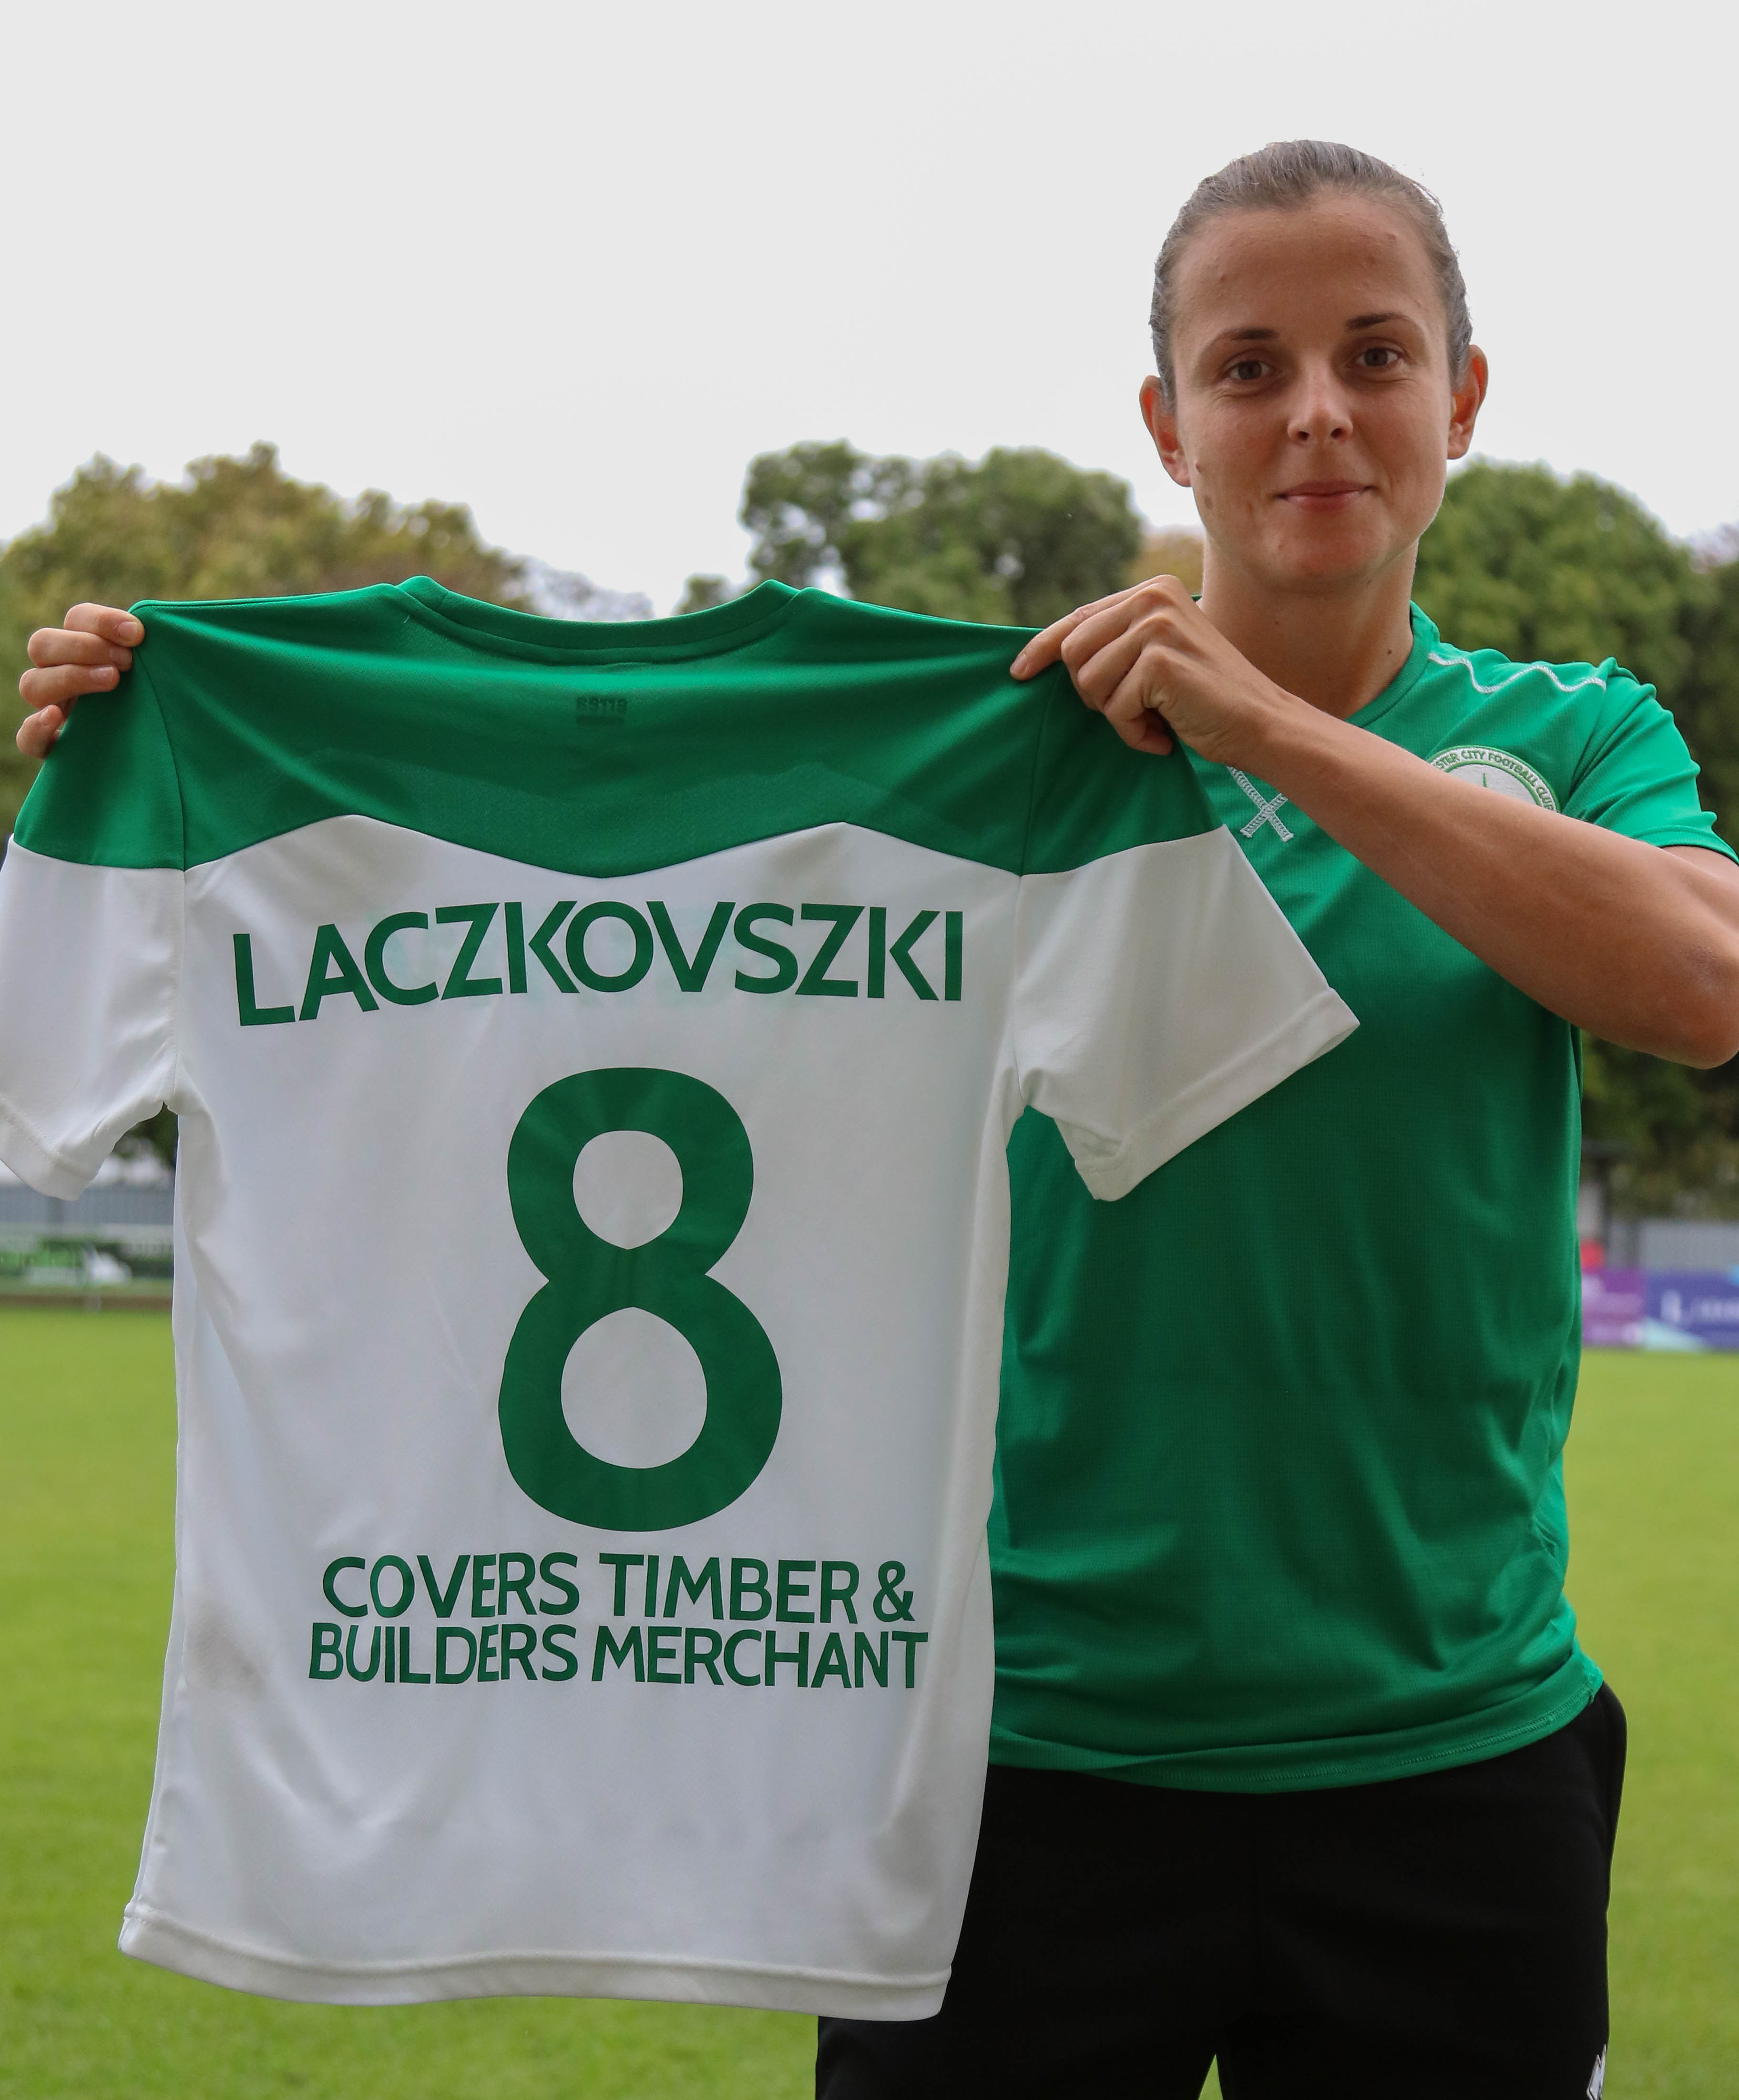 Chichester City women’s footballer secures sponsorship from Covers